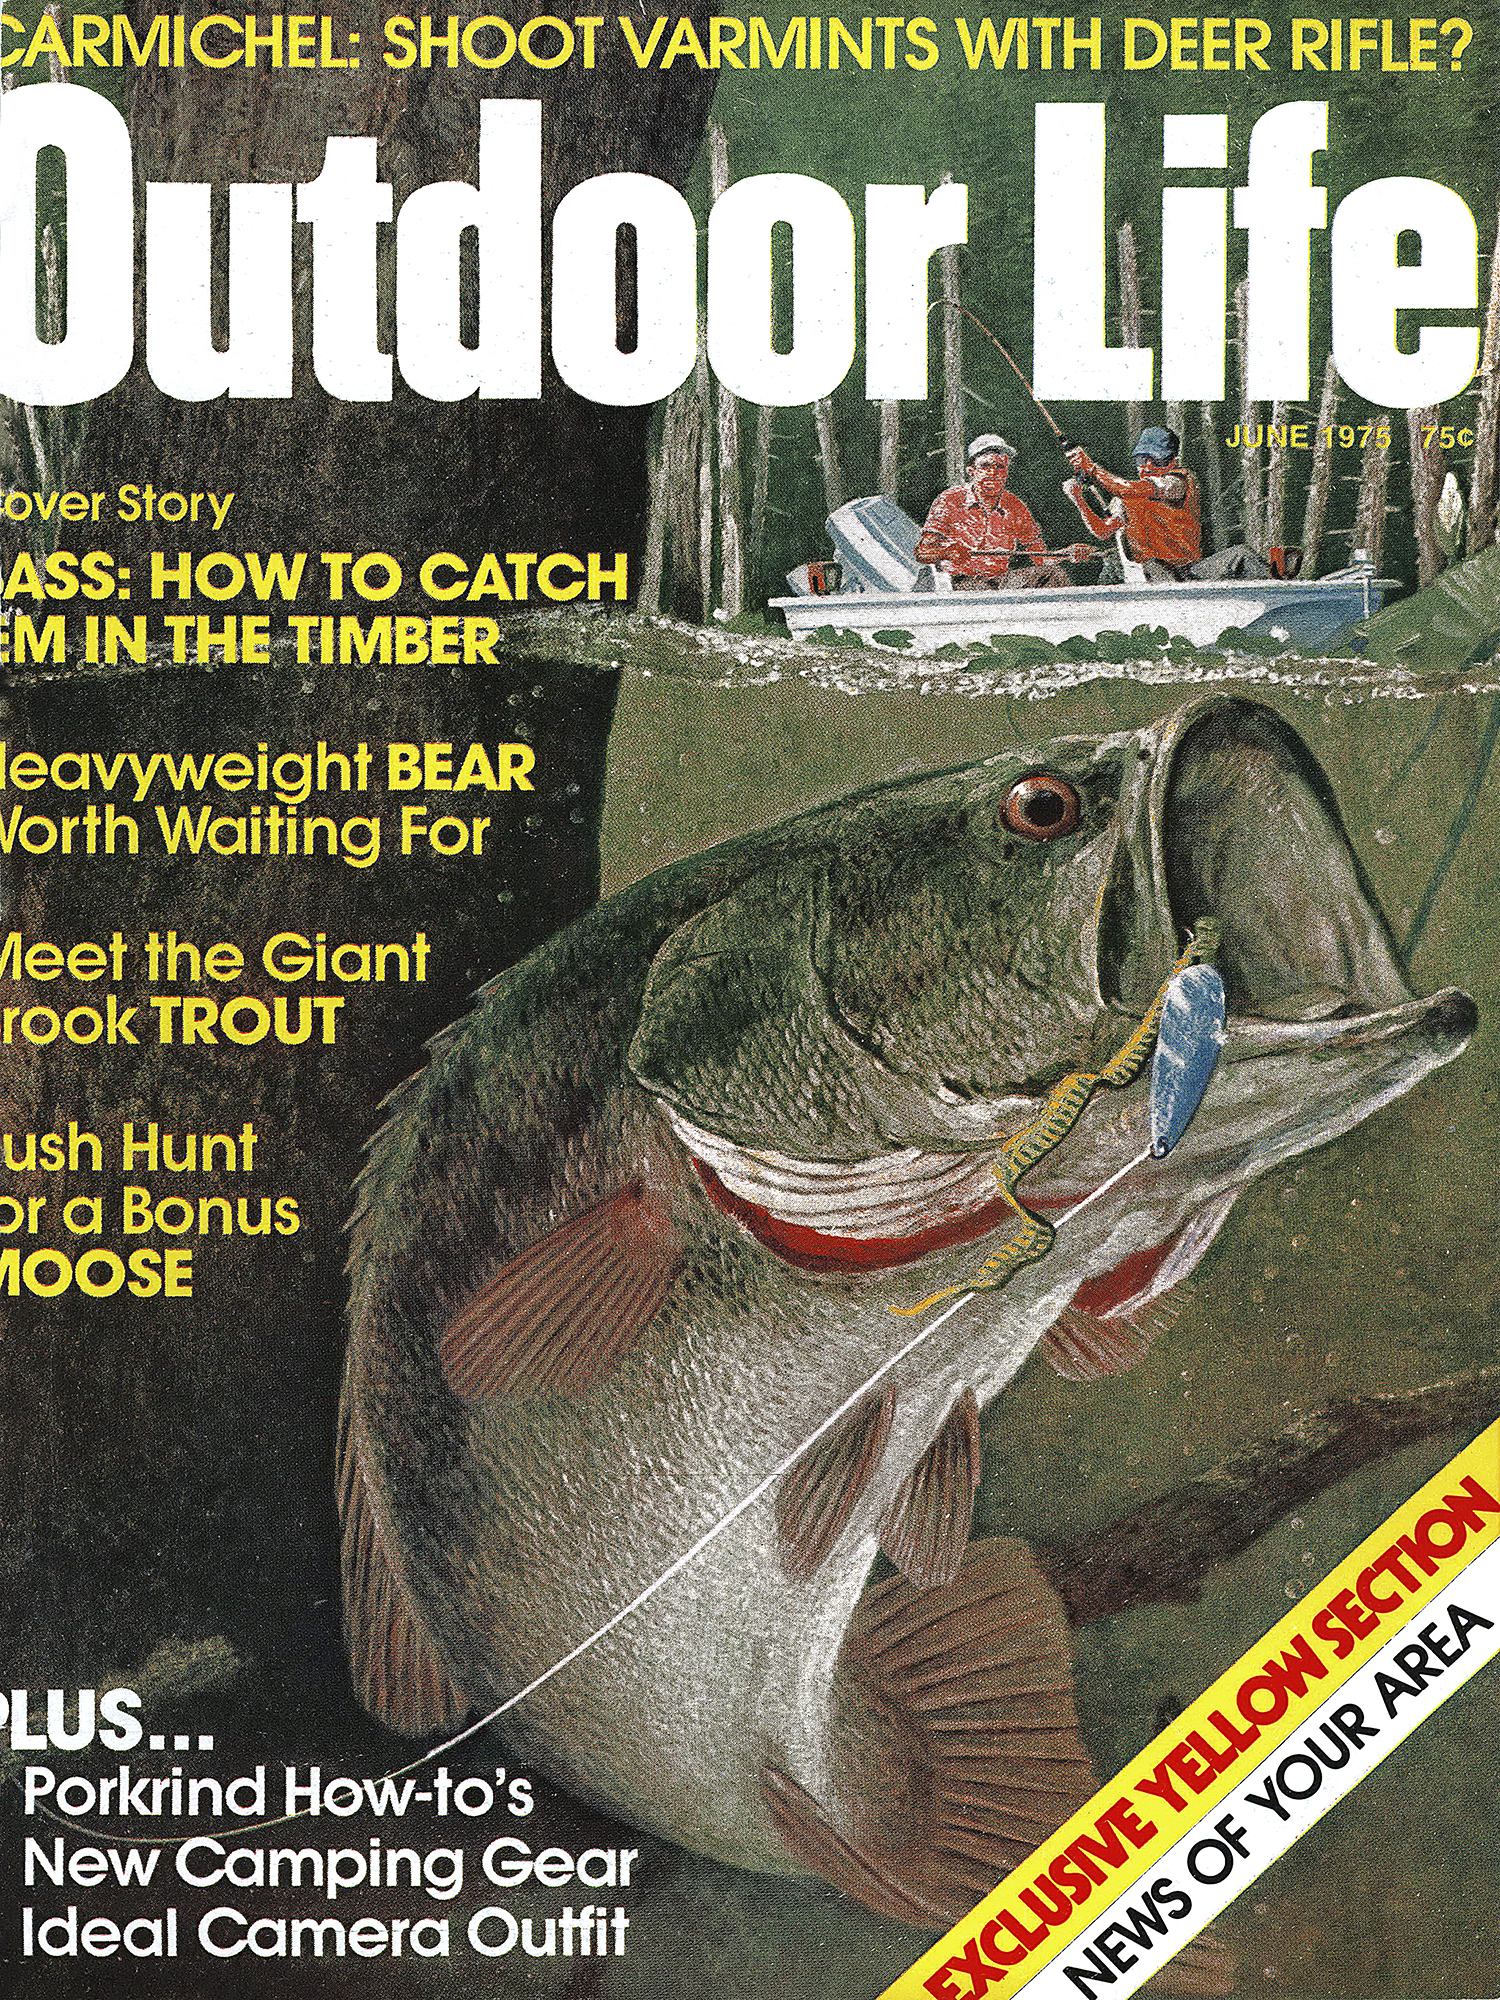 June 1975 cover of Outdoor Life showing two anglers and a largemouth bass in the foreground